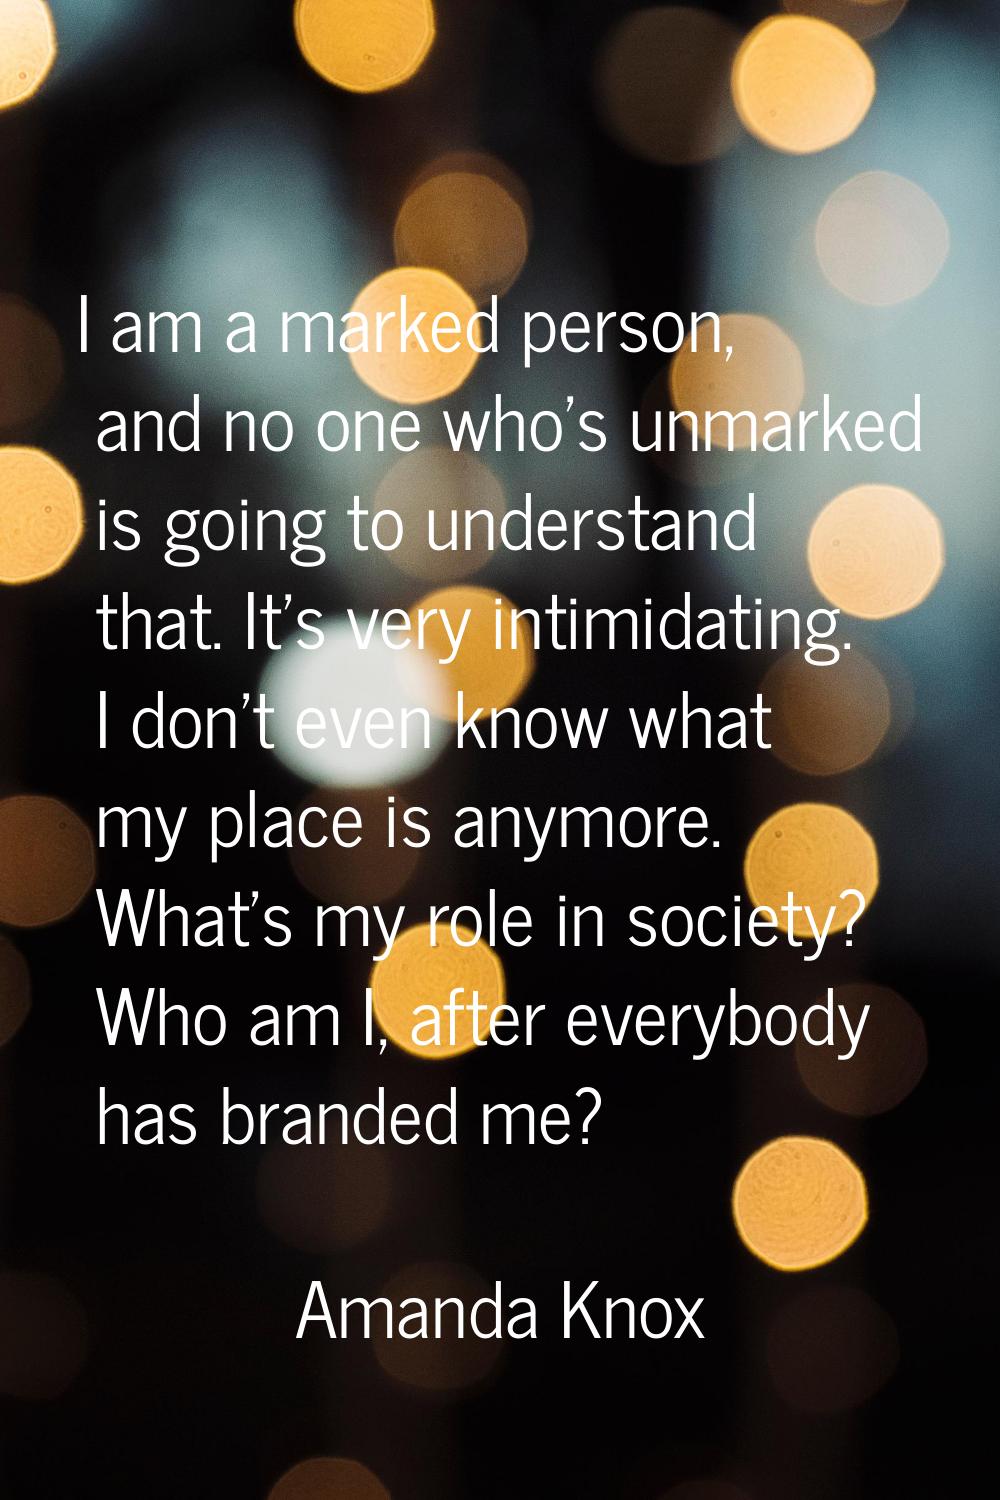 I am a marked person, and no one who's unmarked is going to understand that. It's very intimidating